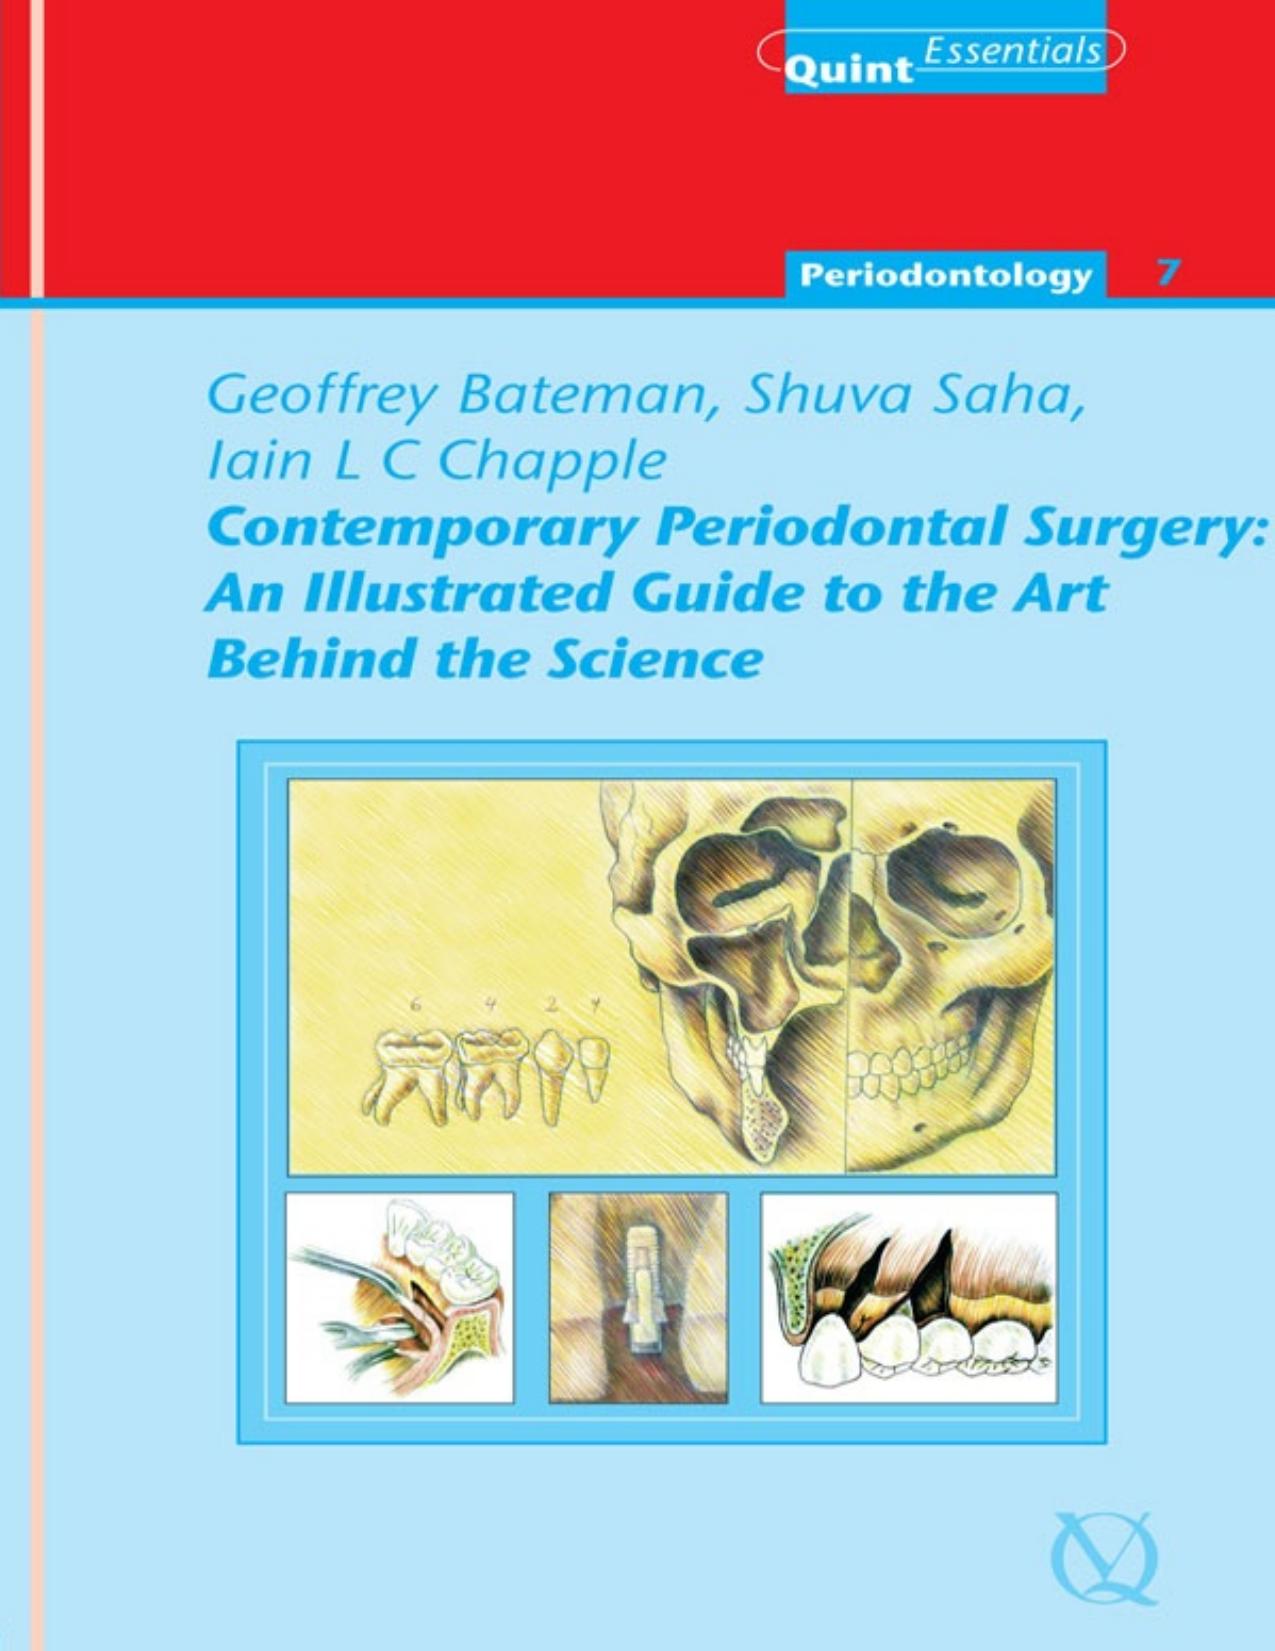 Contemporary Periodontal Surgery_ An Illustrated Guide to the Art Behind the Science.jpg